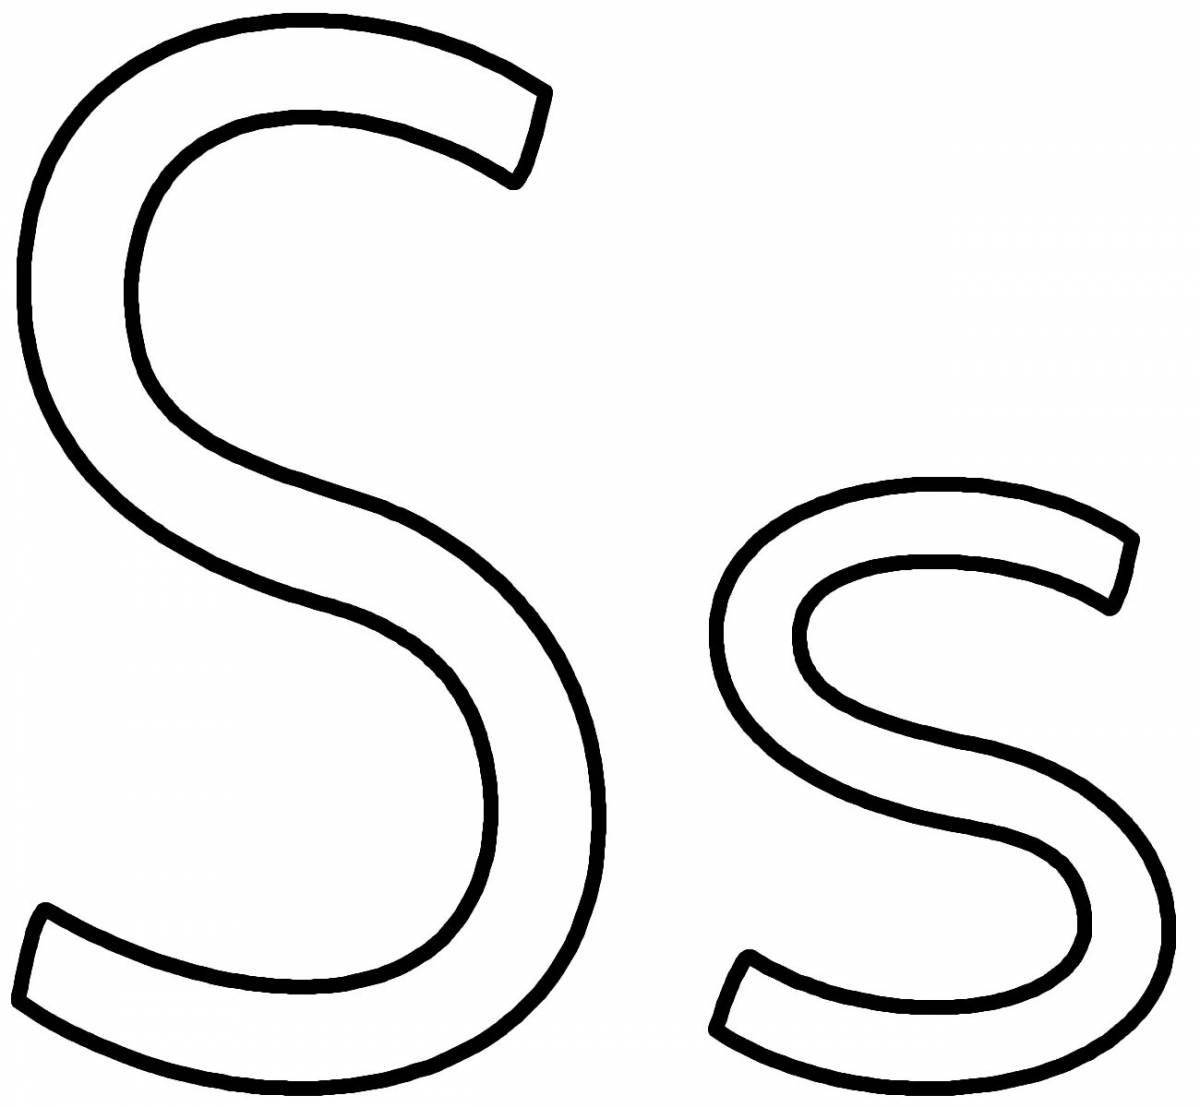 Exciting coloring book with the letter s